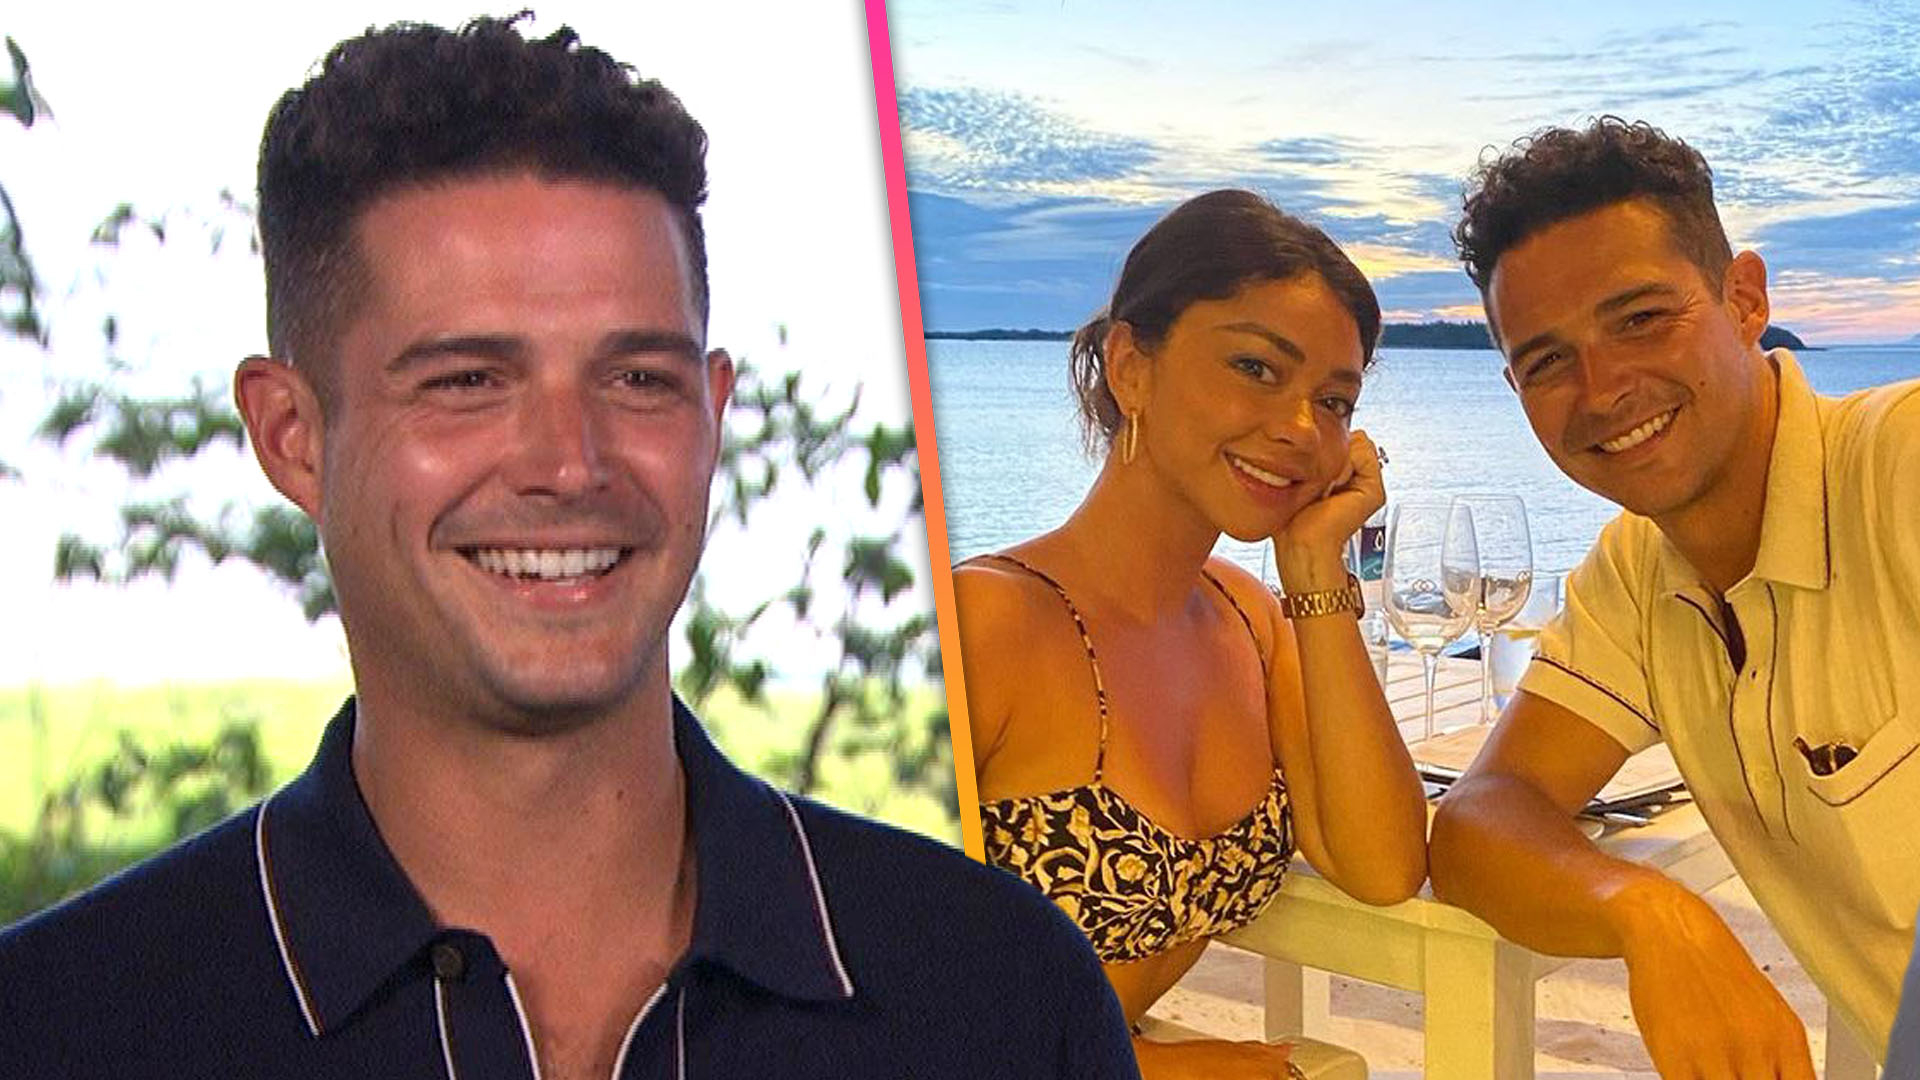 See This Week's Shocking Rose Ceremony from 'BIP' and Who Brayden